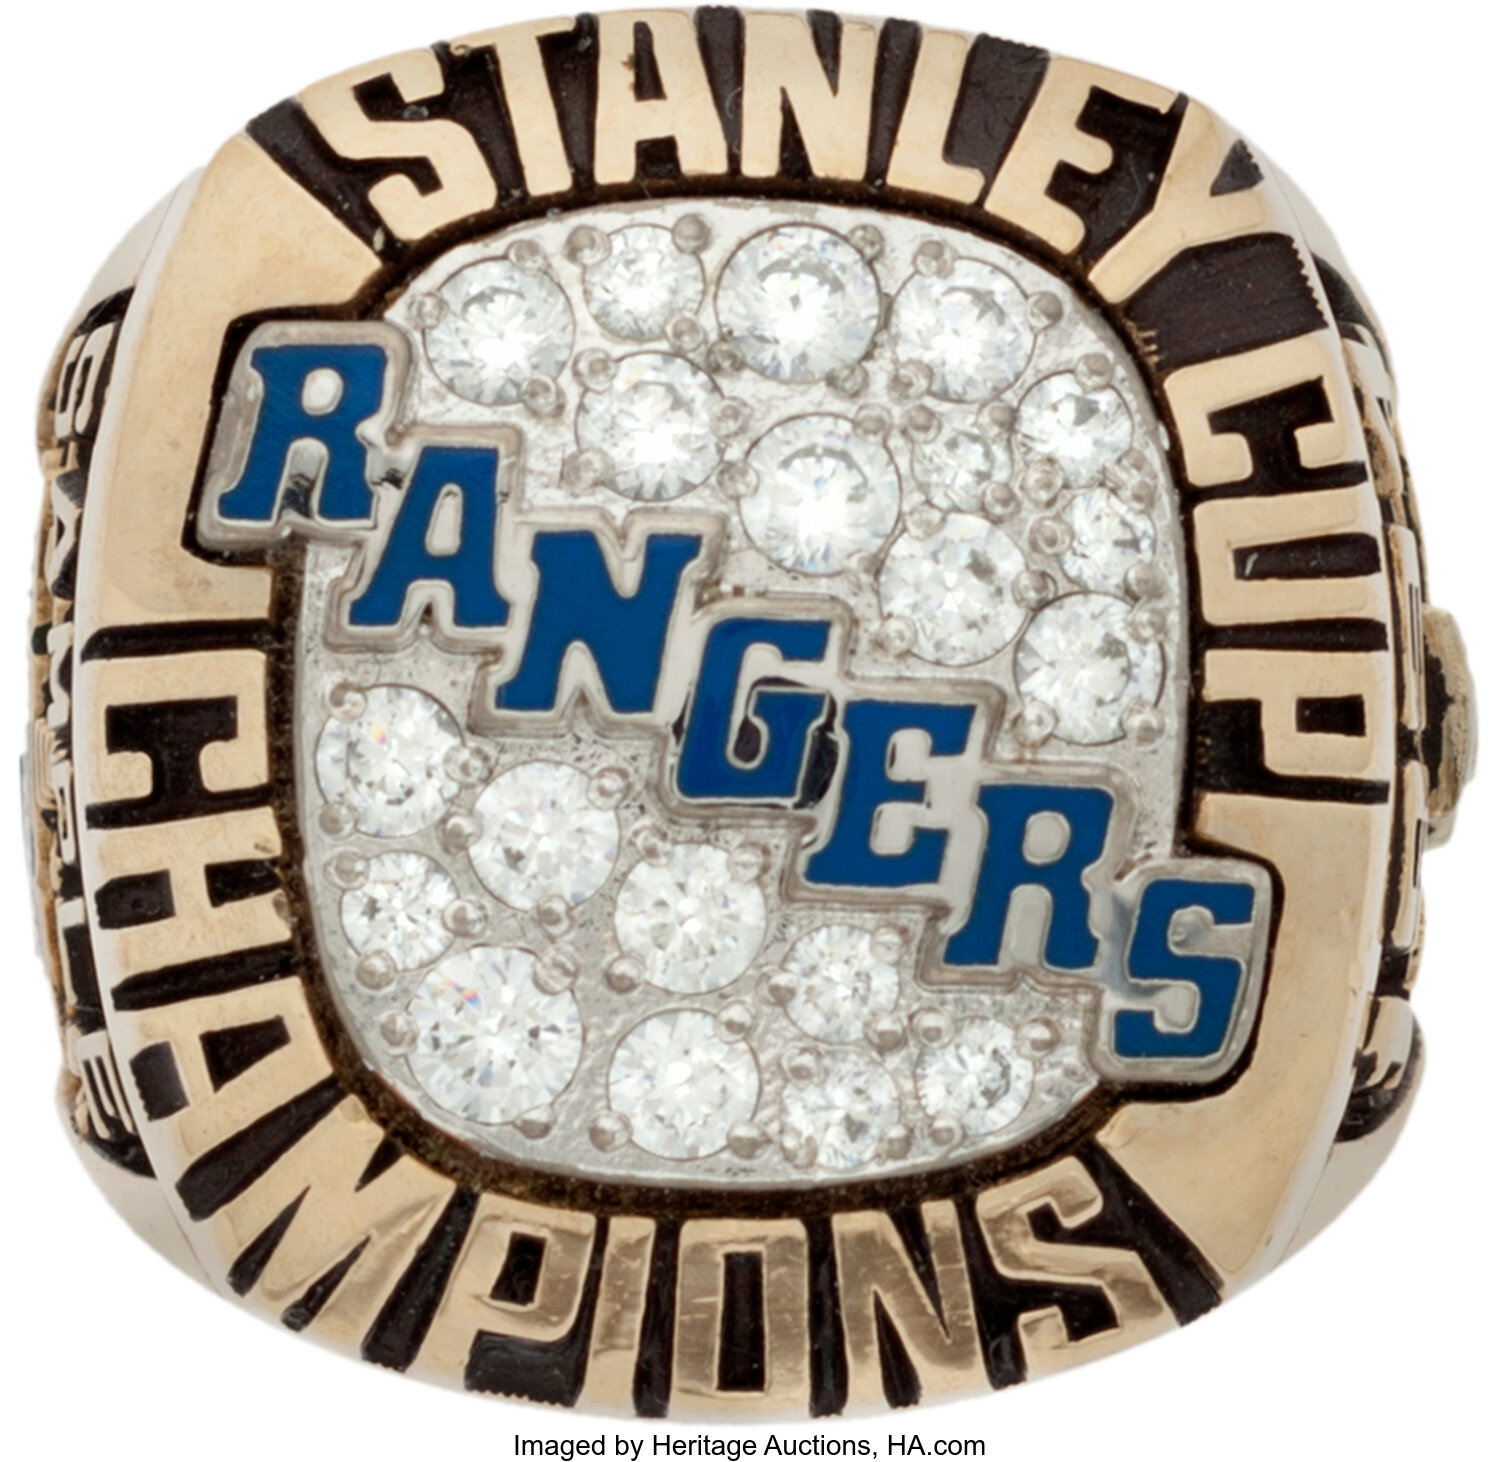 New York Rangers 1994 Stanley Cup Champion XL new with tag Super